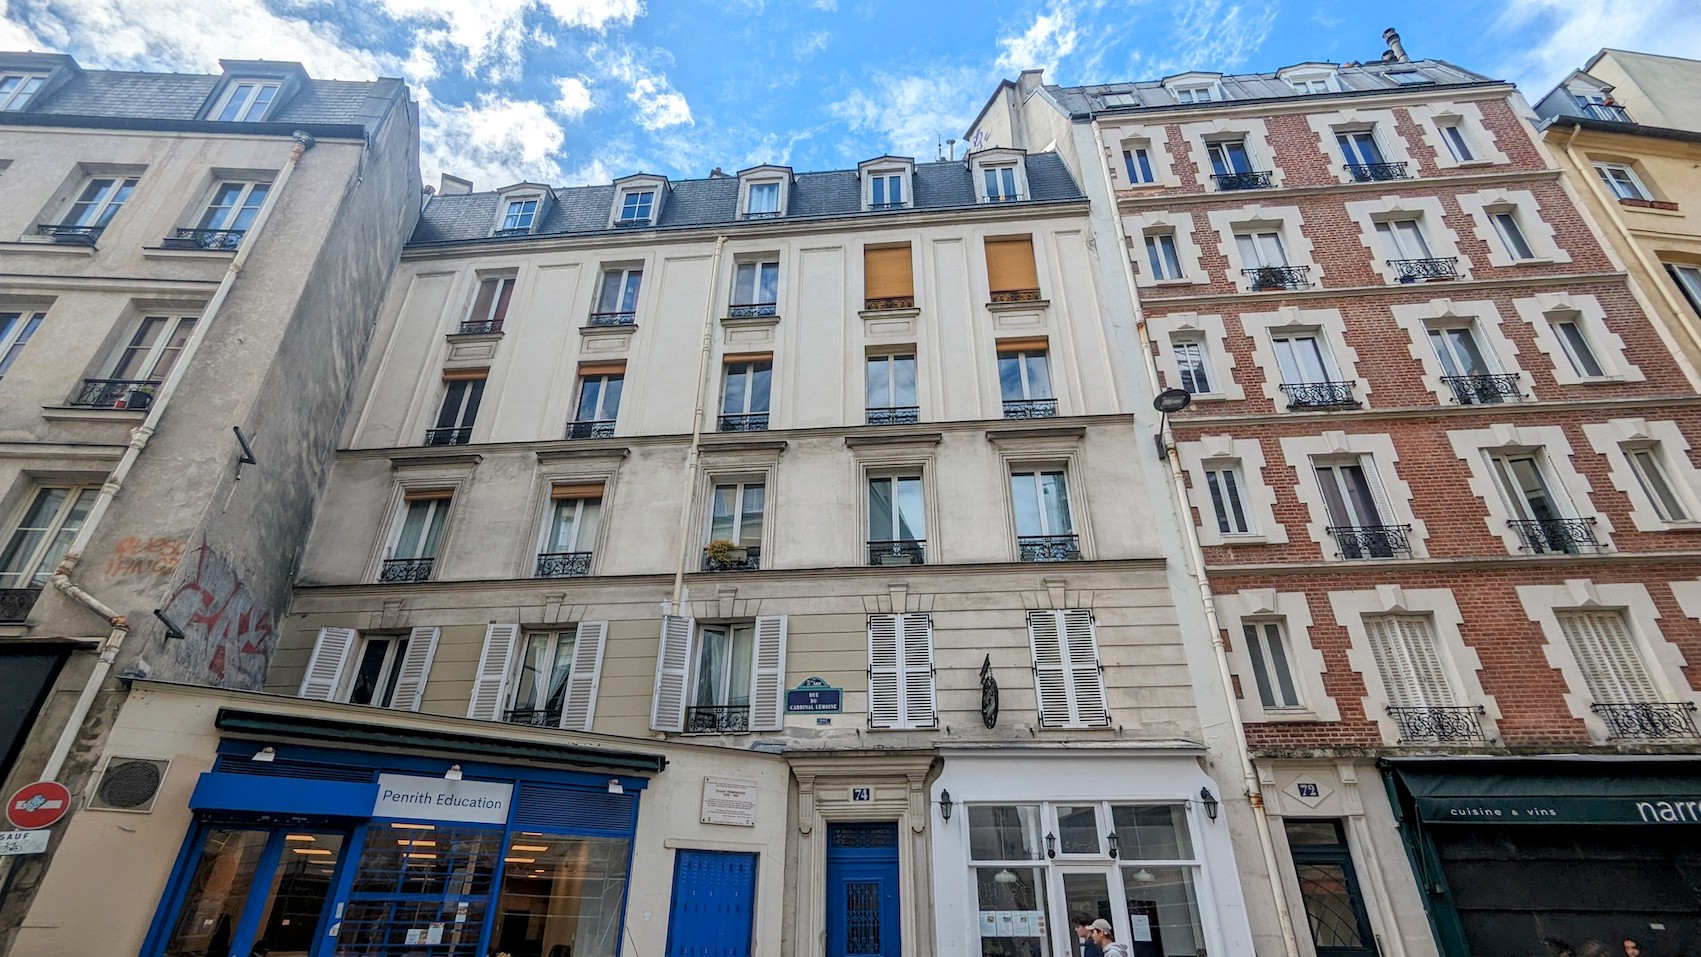 Hemingway's first Paris home viewed from the outside. A sign on the facade of the house refers to the famous resident.